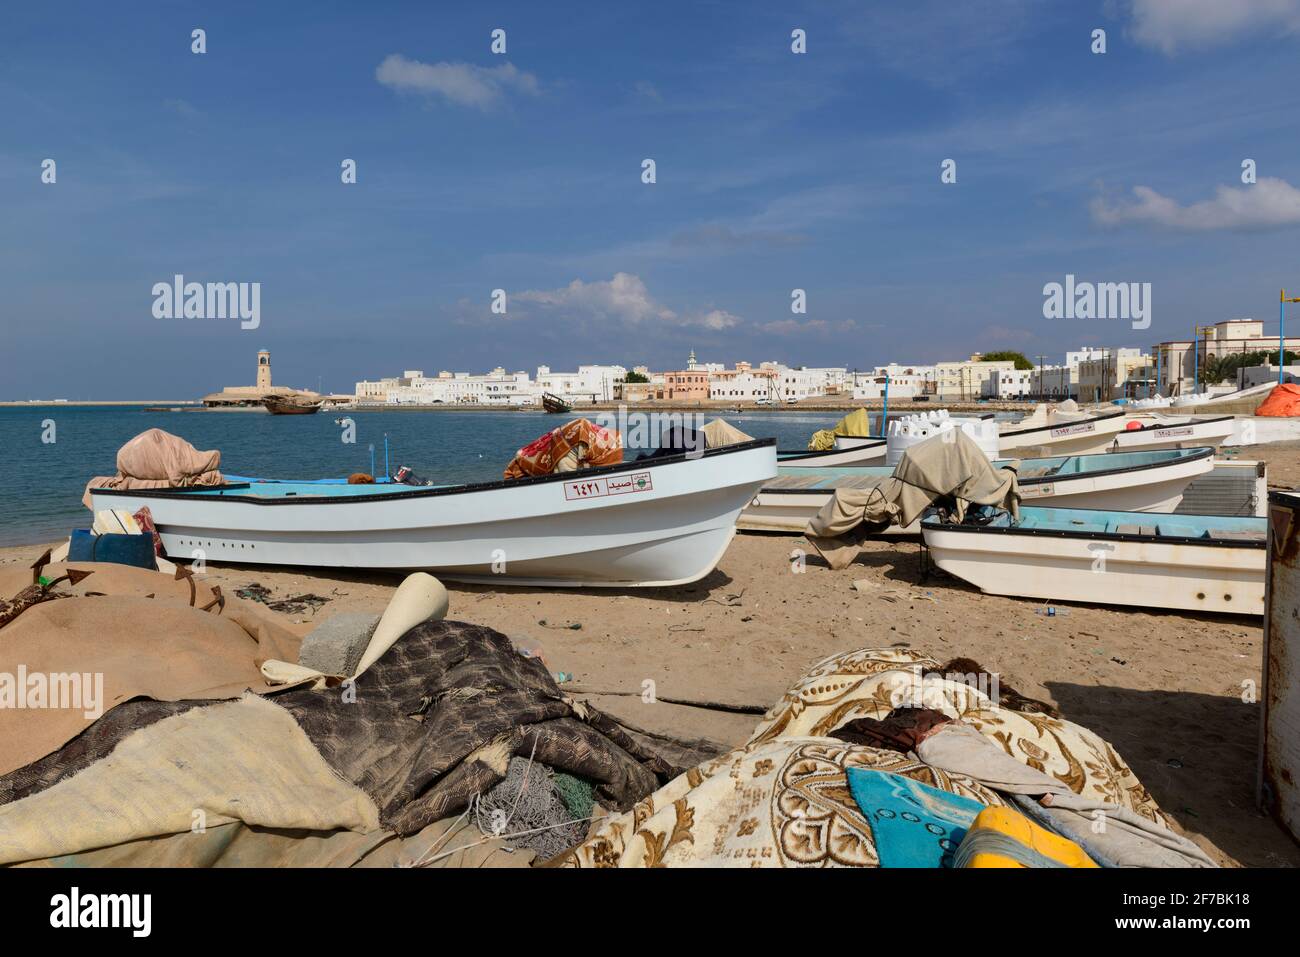 Small fishing boats on the beach of the village Ayjah near the city Sur, Oman. Stock Photo